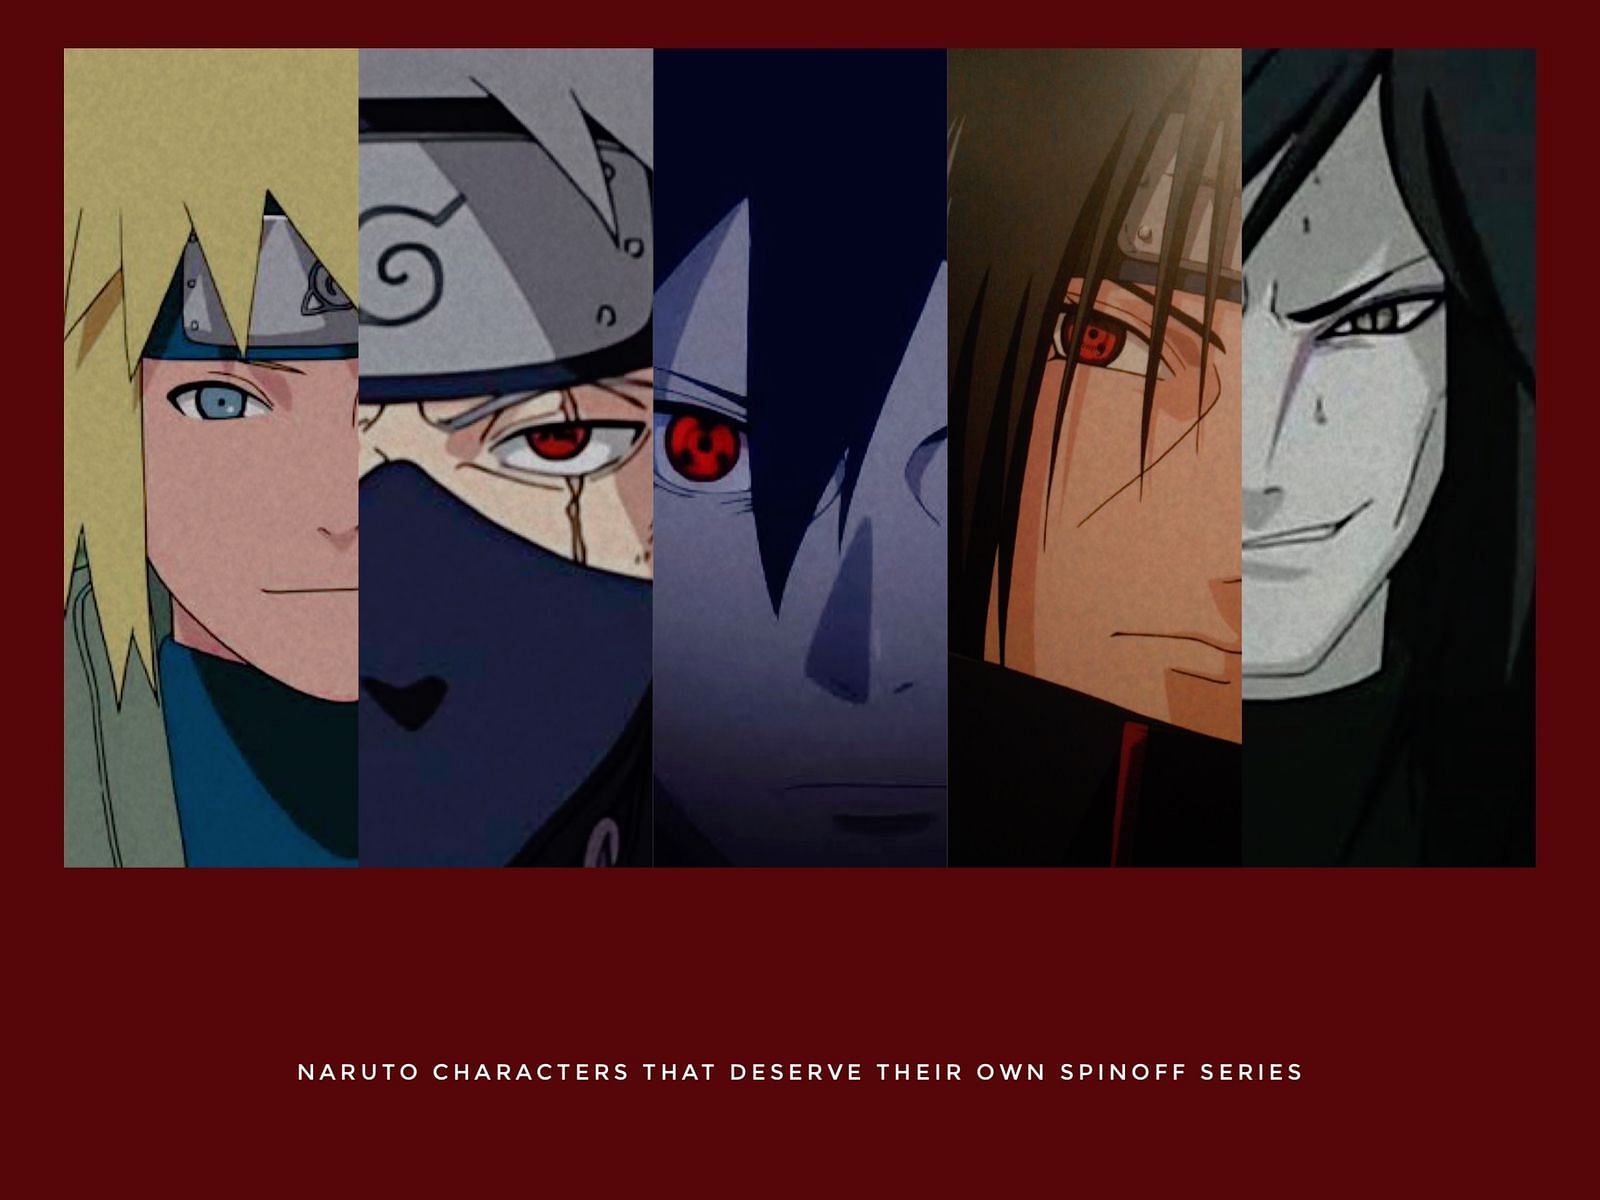 Naruto Characters that deserve their own spinoff series (image via Studio Pierrot)